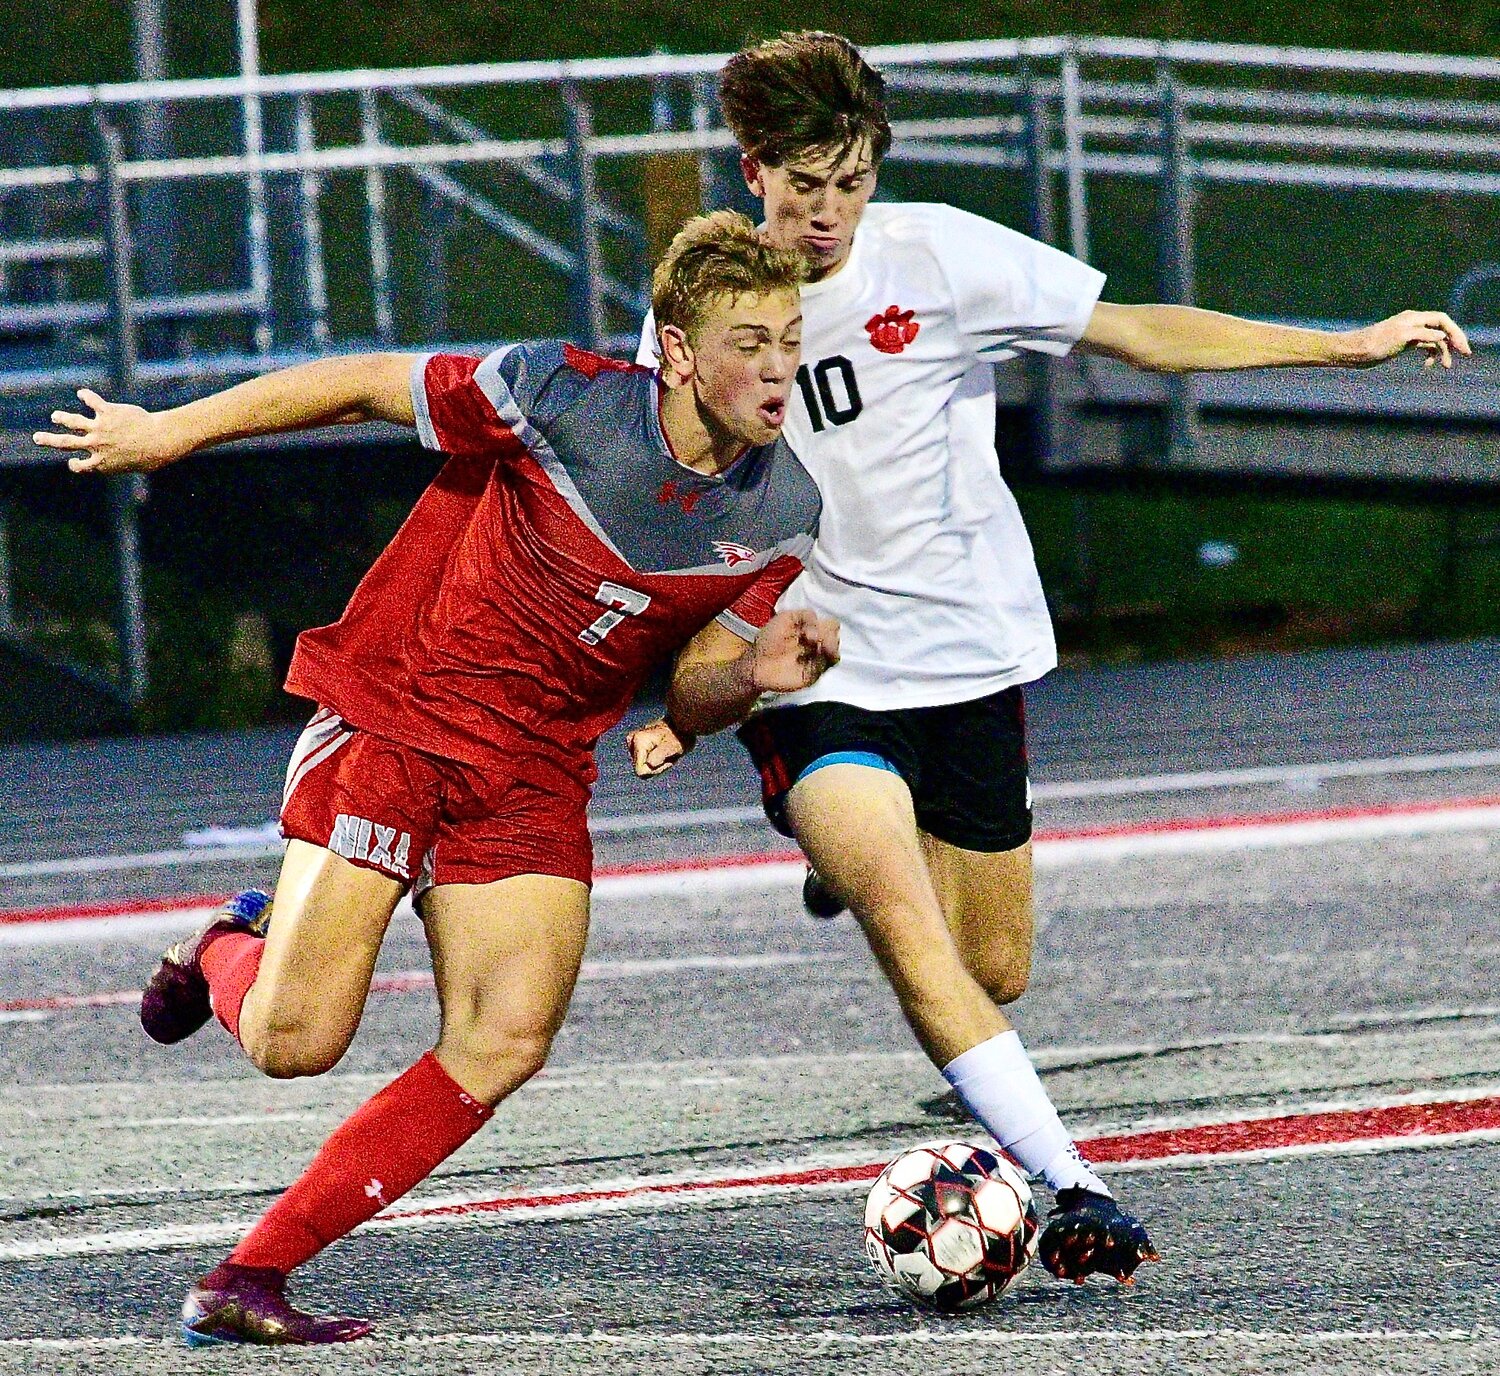 NIXA'S CAEDEN CLOUD AND OZARK'S PHIN SCOTT meet up while going after the ball.